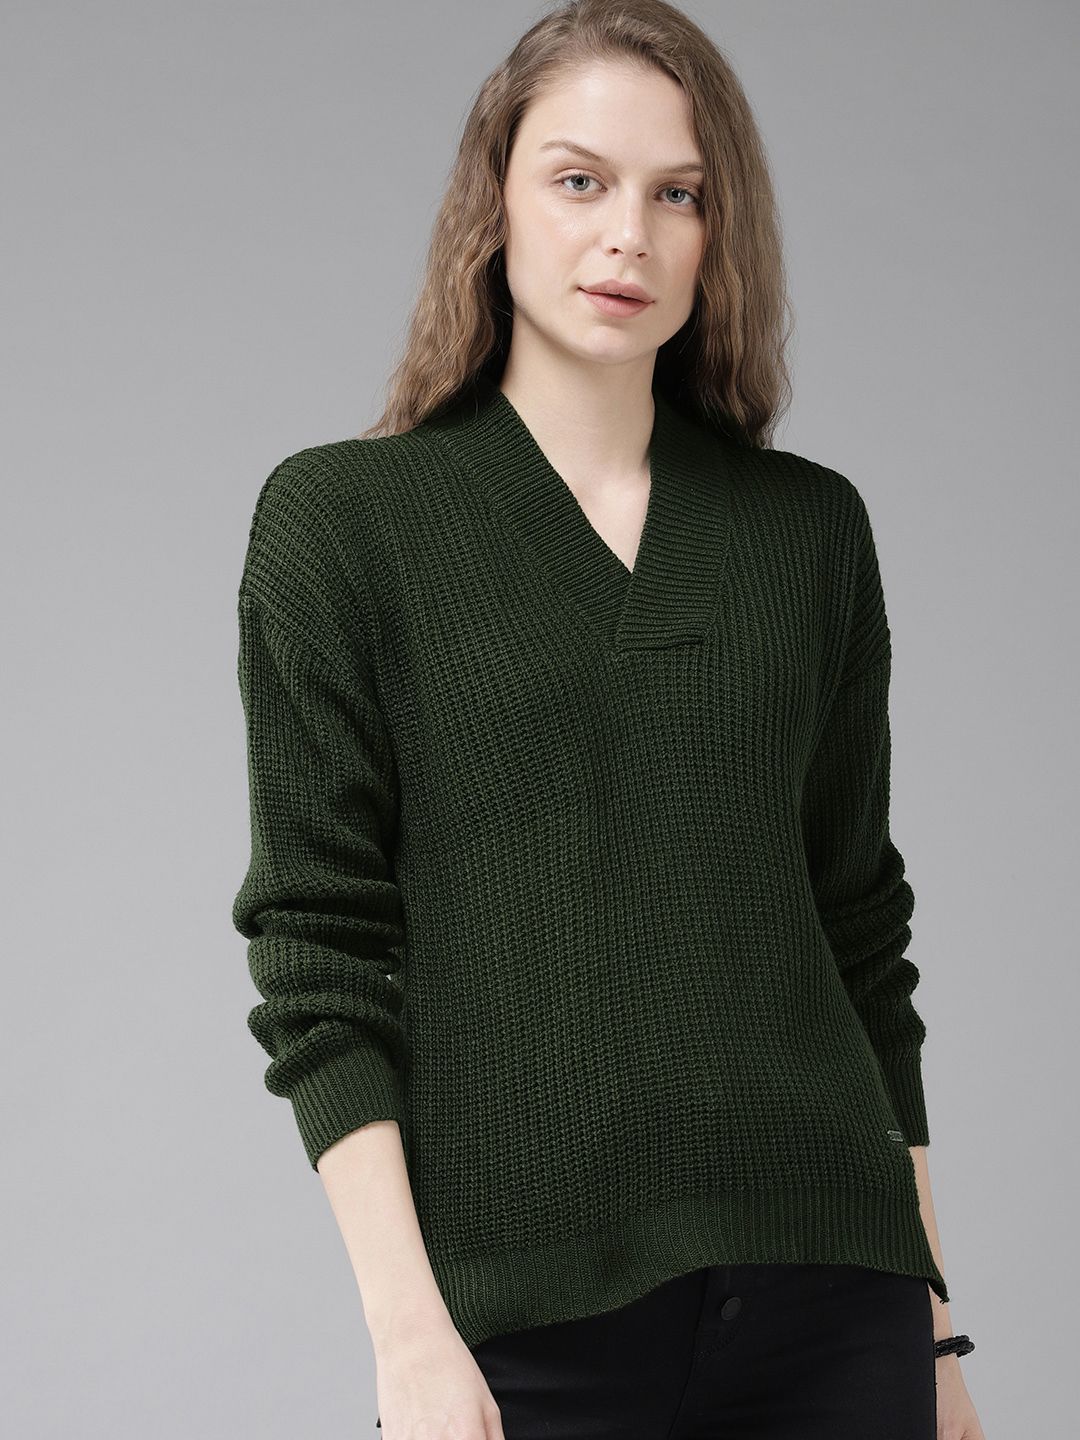 The Roadster Lifestyle Co Women Green Solid Sweater Price in India